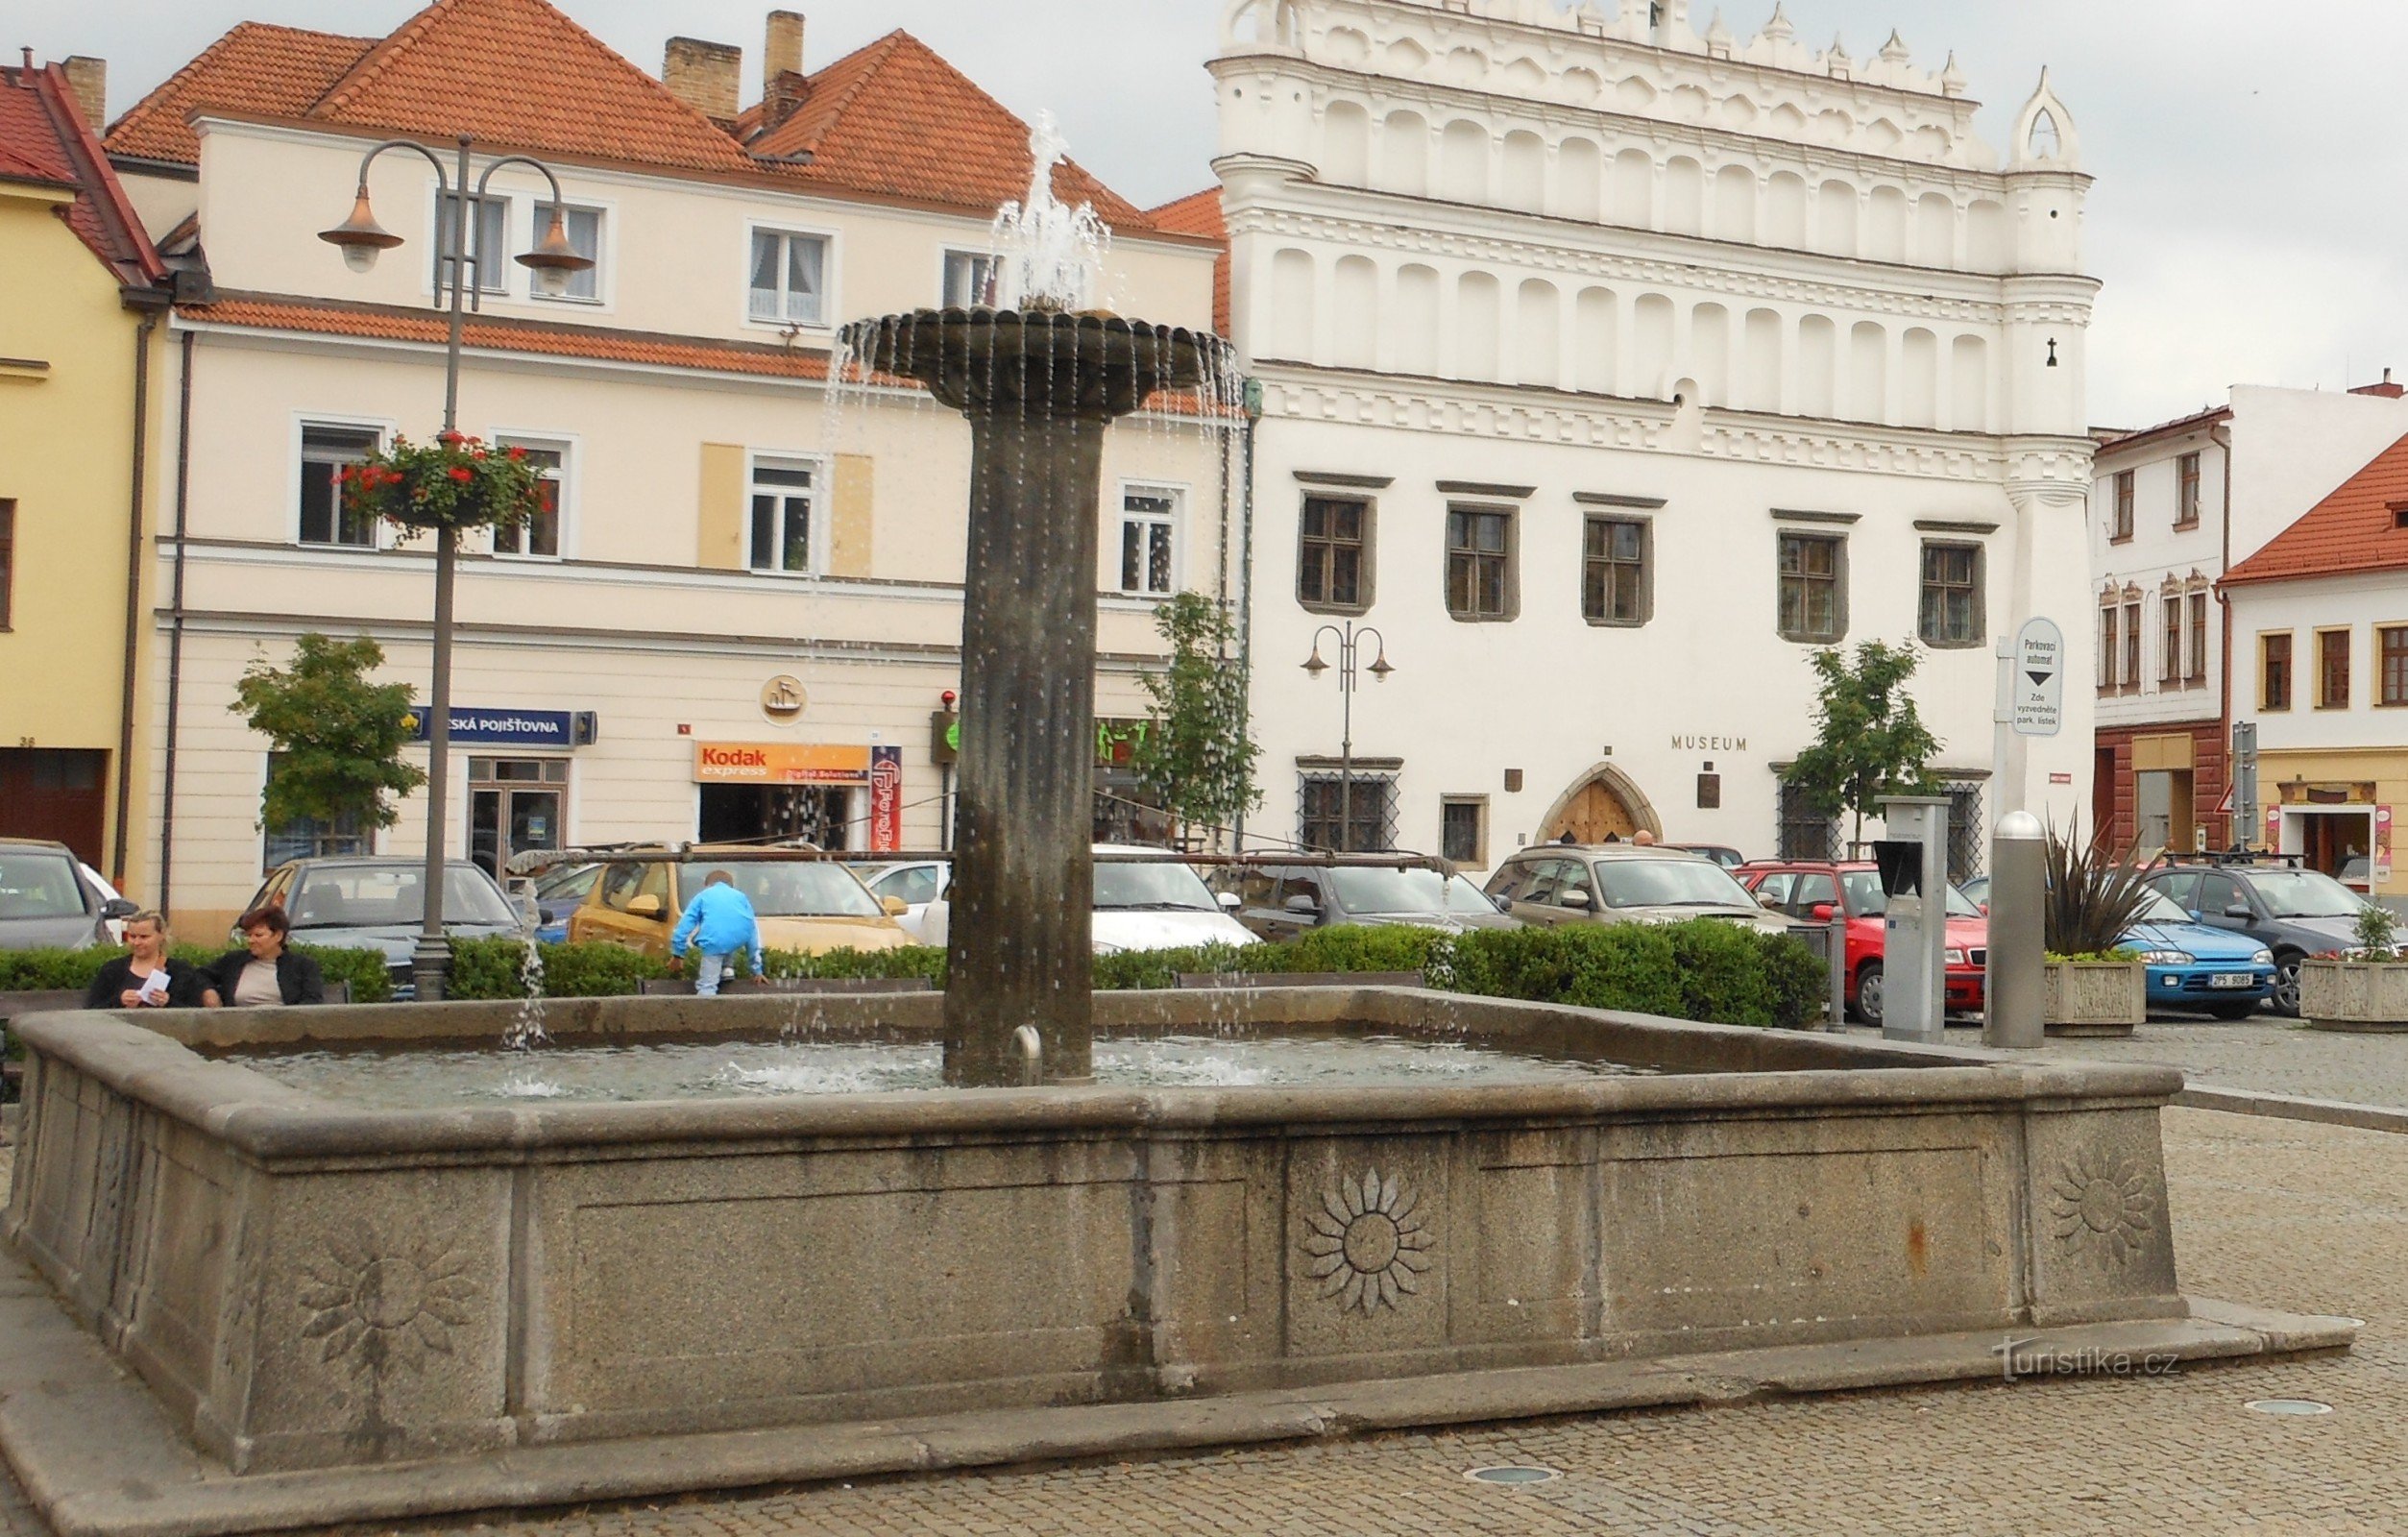 The fountain in front of the town hall building in Sušice